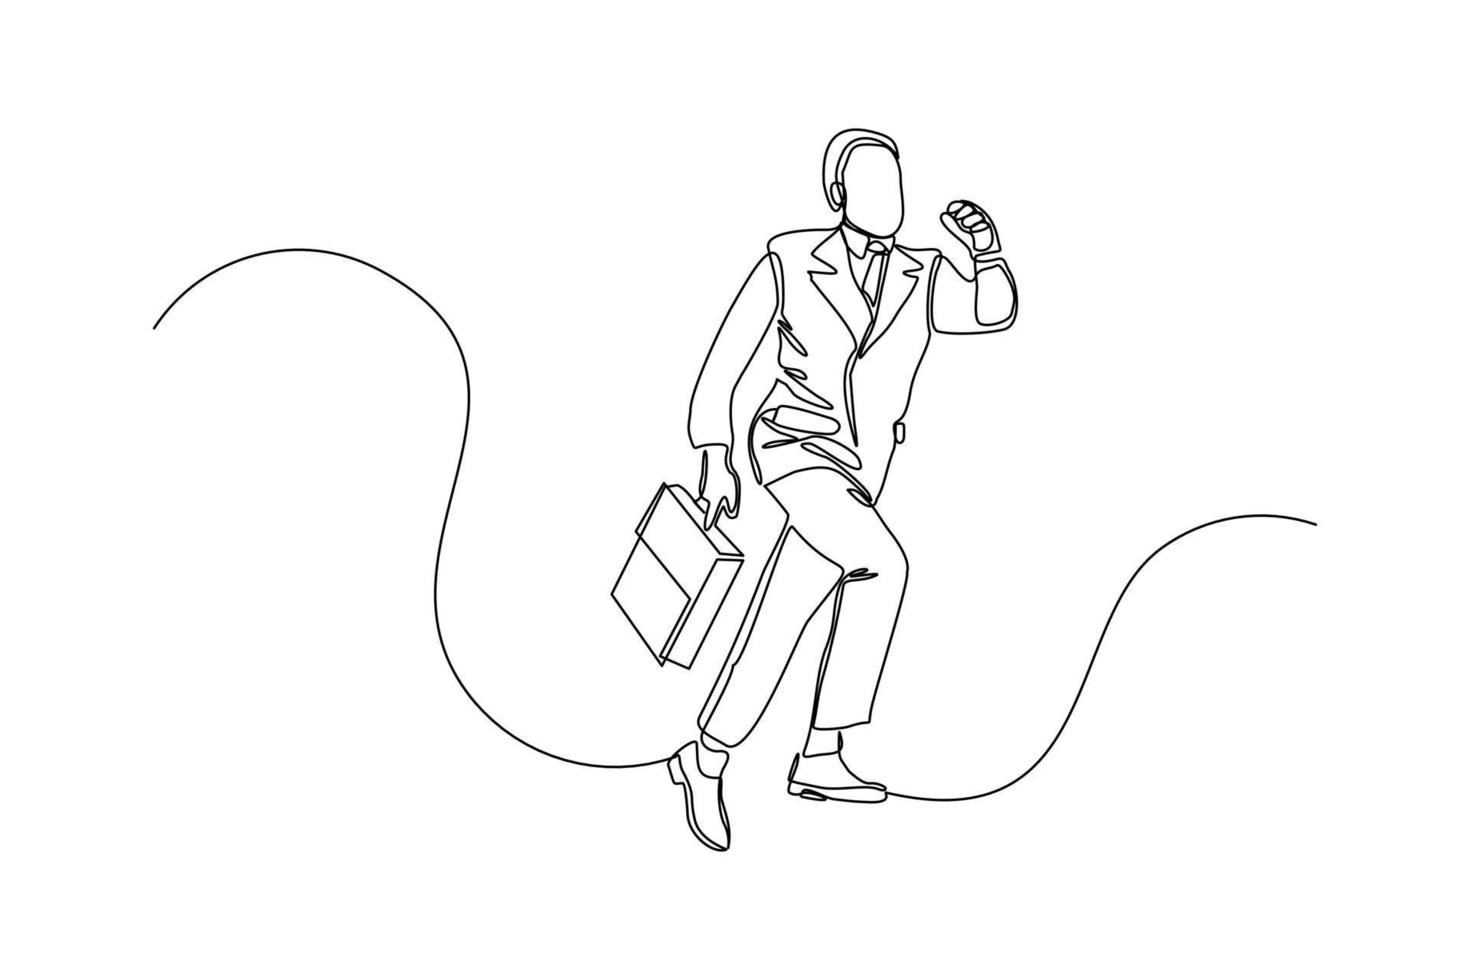 Continuous line drawing of happy young business man holding briefcase. Single one line art of office worker. Vector illustration